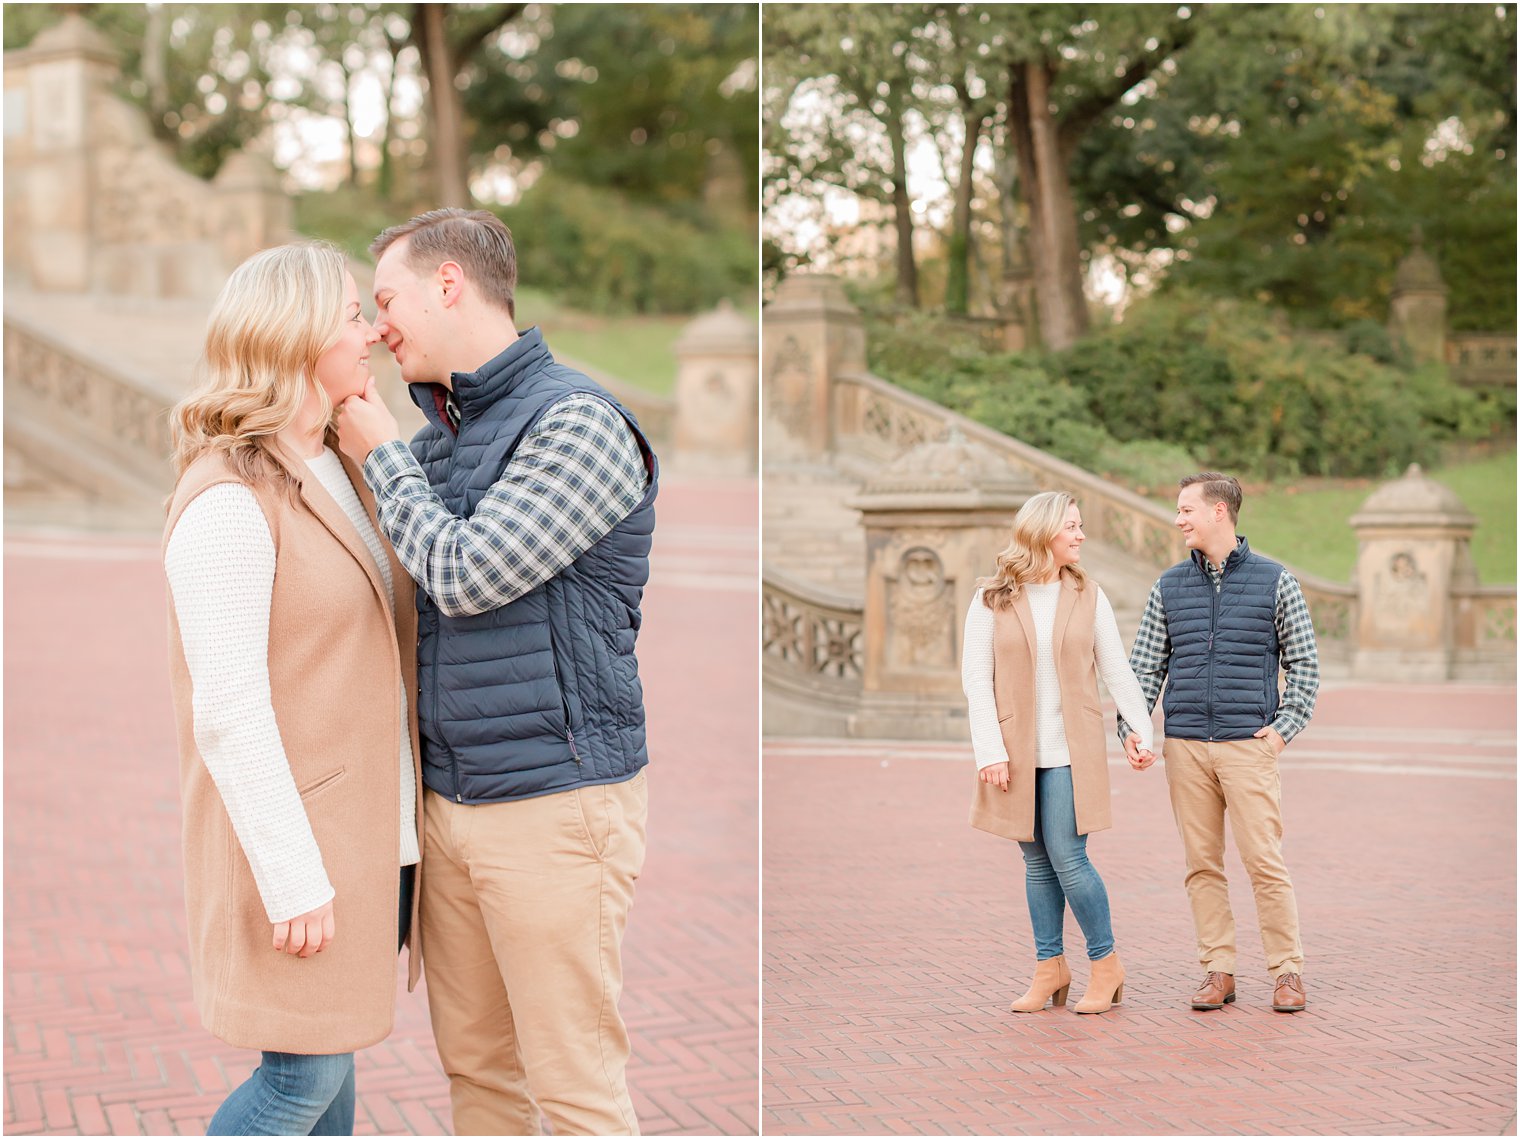 Fall engagement photos in Central Park, NYC